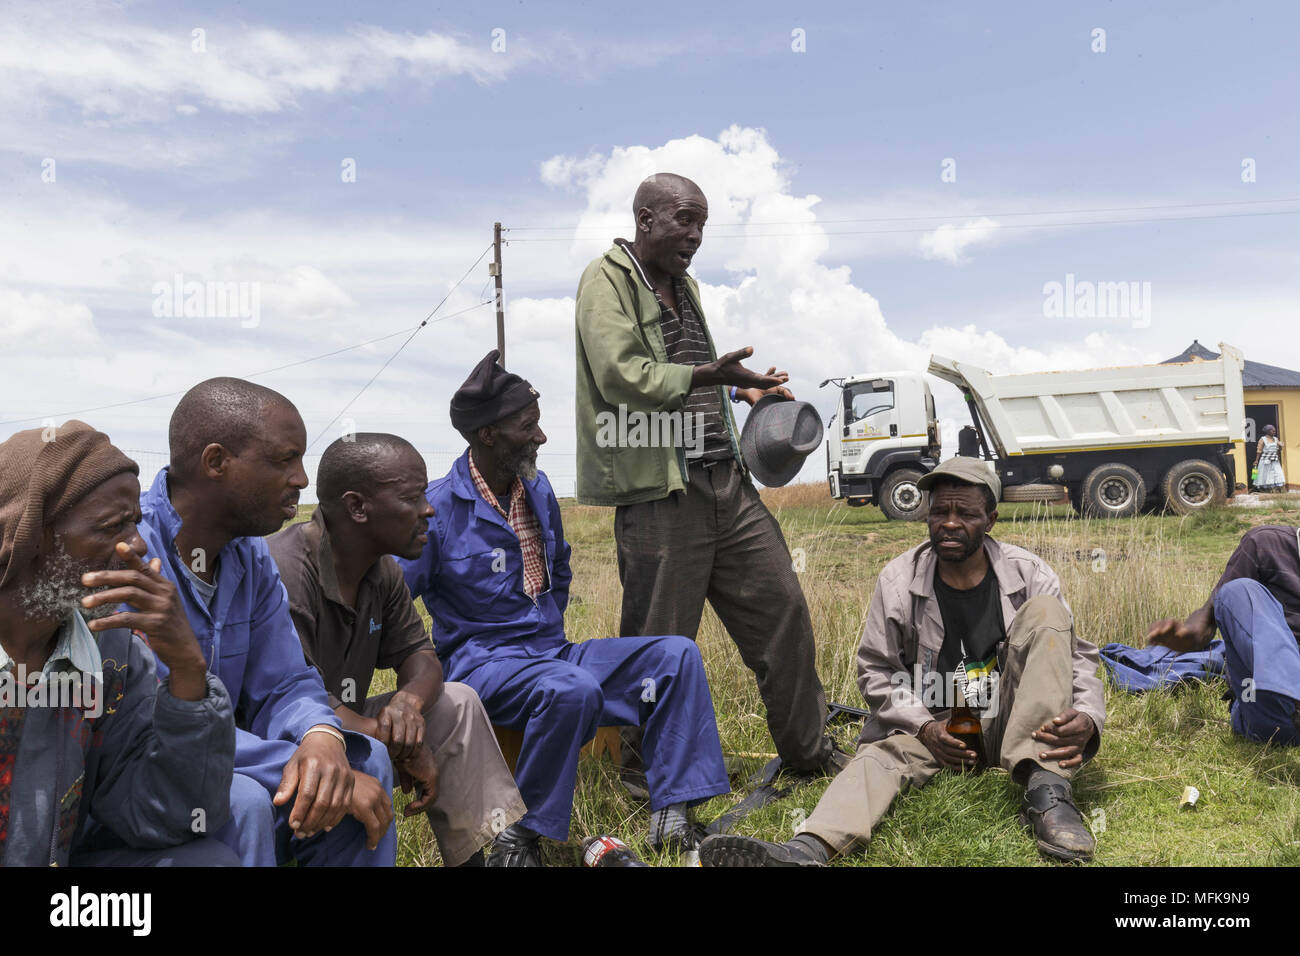 December 2, 2017 - Matatiele, Eastern Cape, South Africa - Xhosa men sit together and drink traditional home made beer. (Credit Image: © Stefan Kleinowitz via ZUMA Wire) Stock Photo